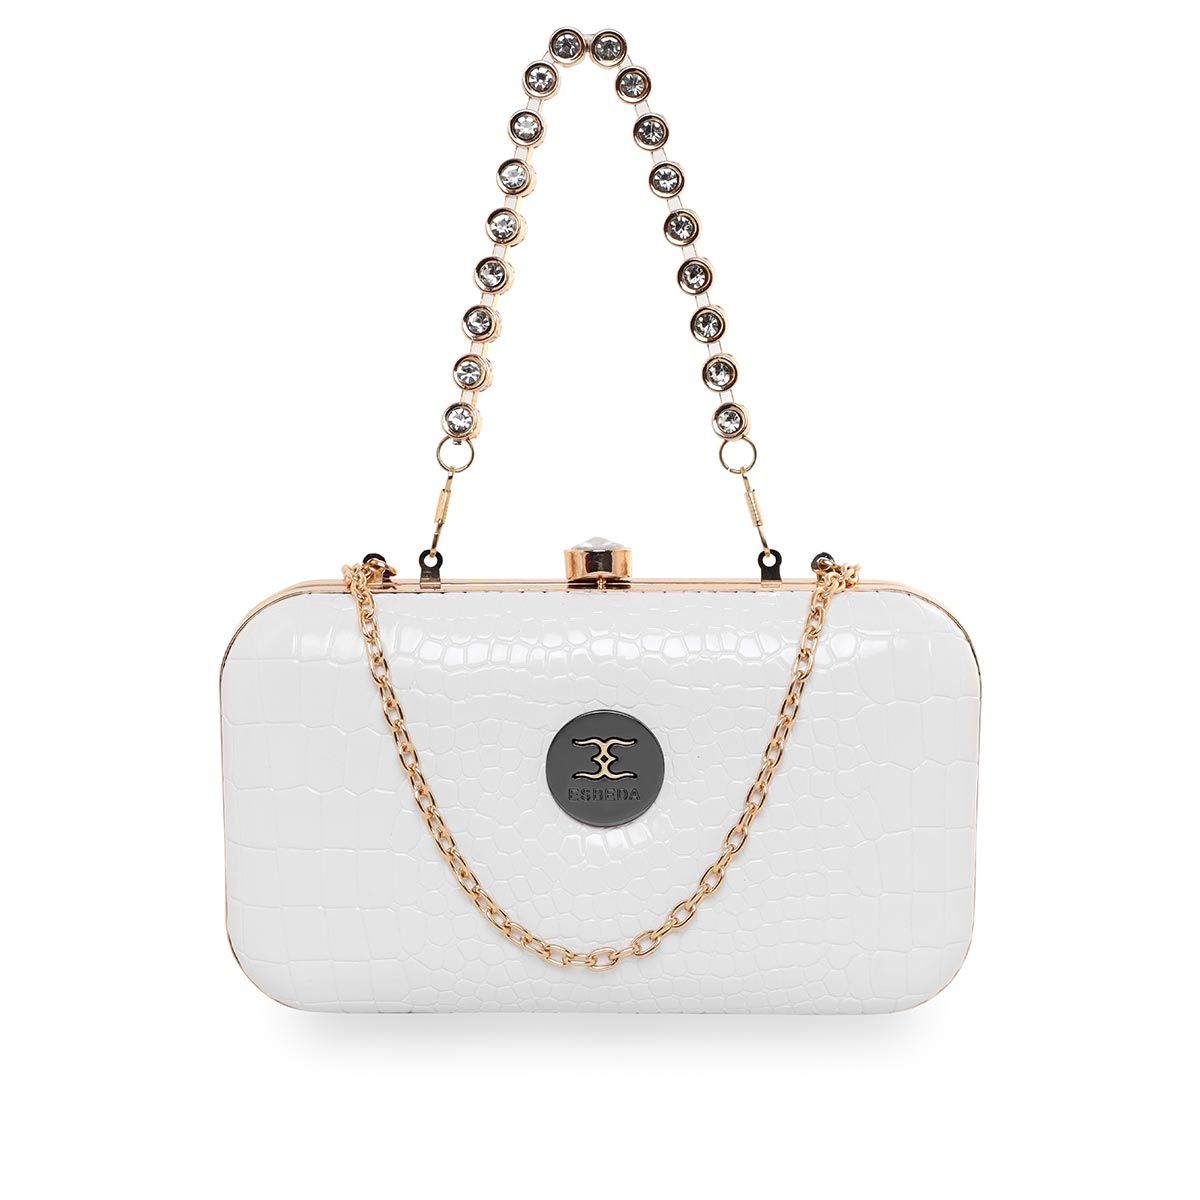 Buy Flawless Multipurpose Off White Purse Gift Online at ₹2999